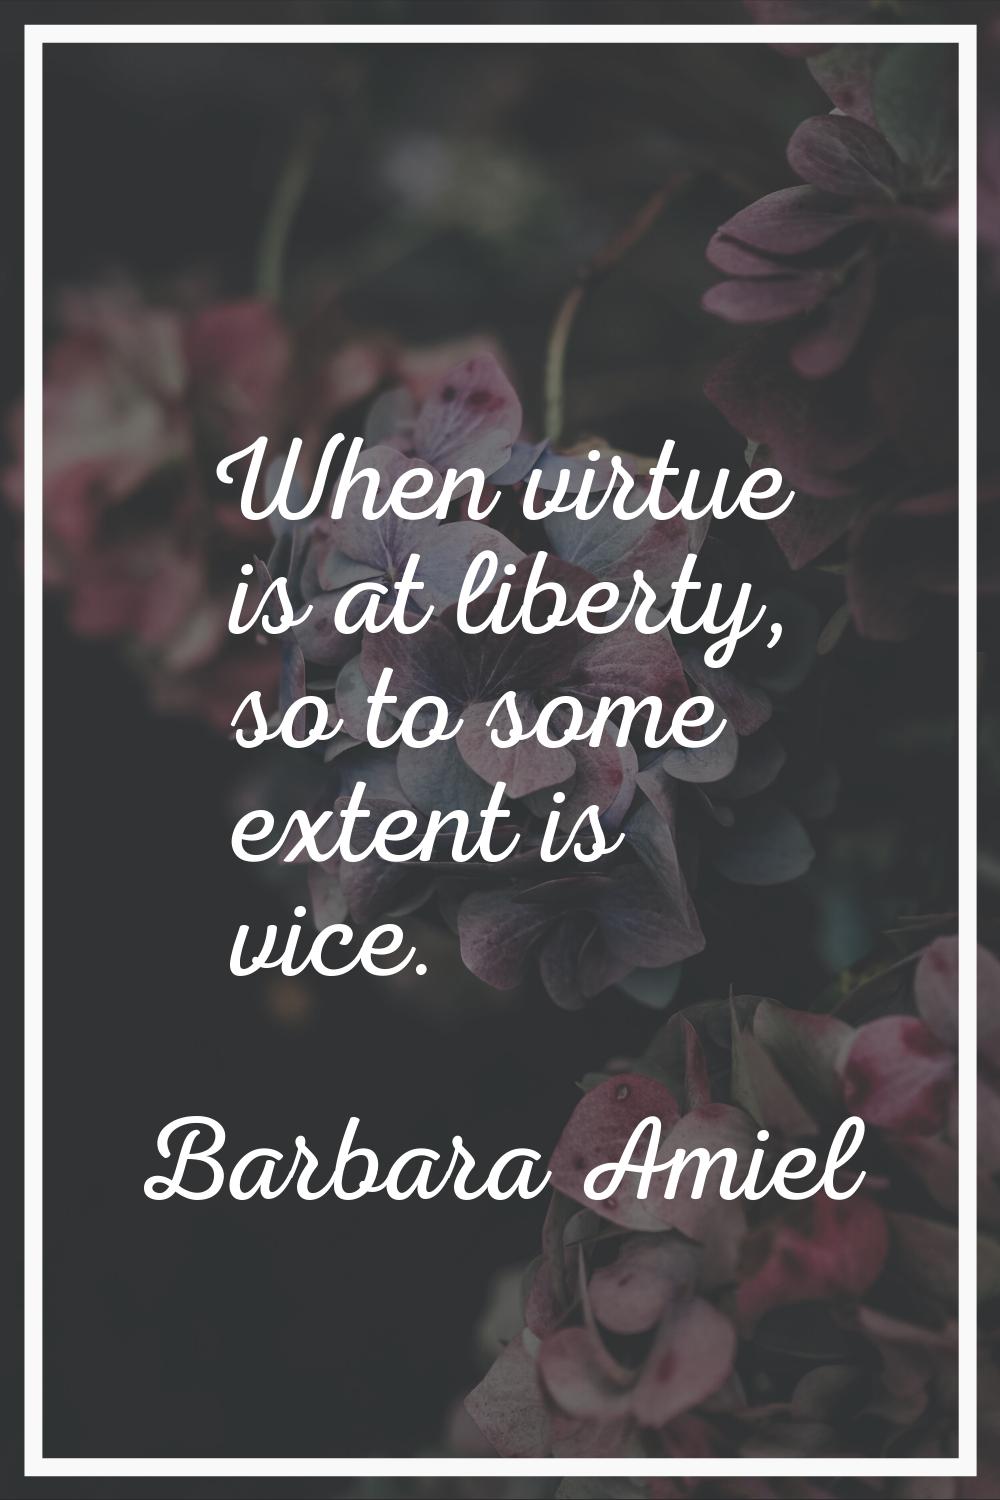 When virtue is at liberty, so to some extent is vice.